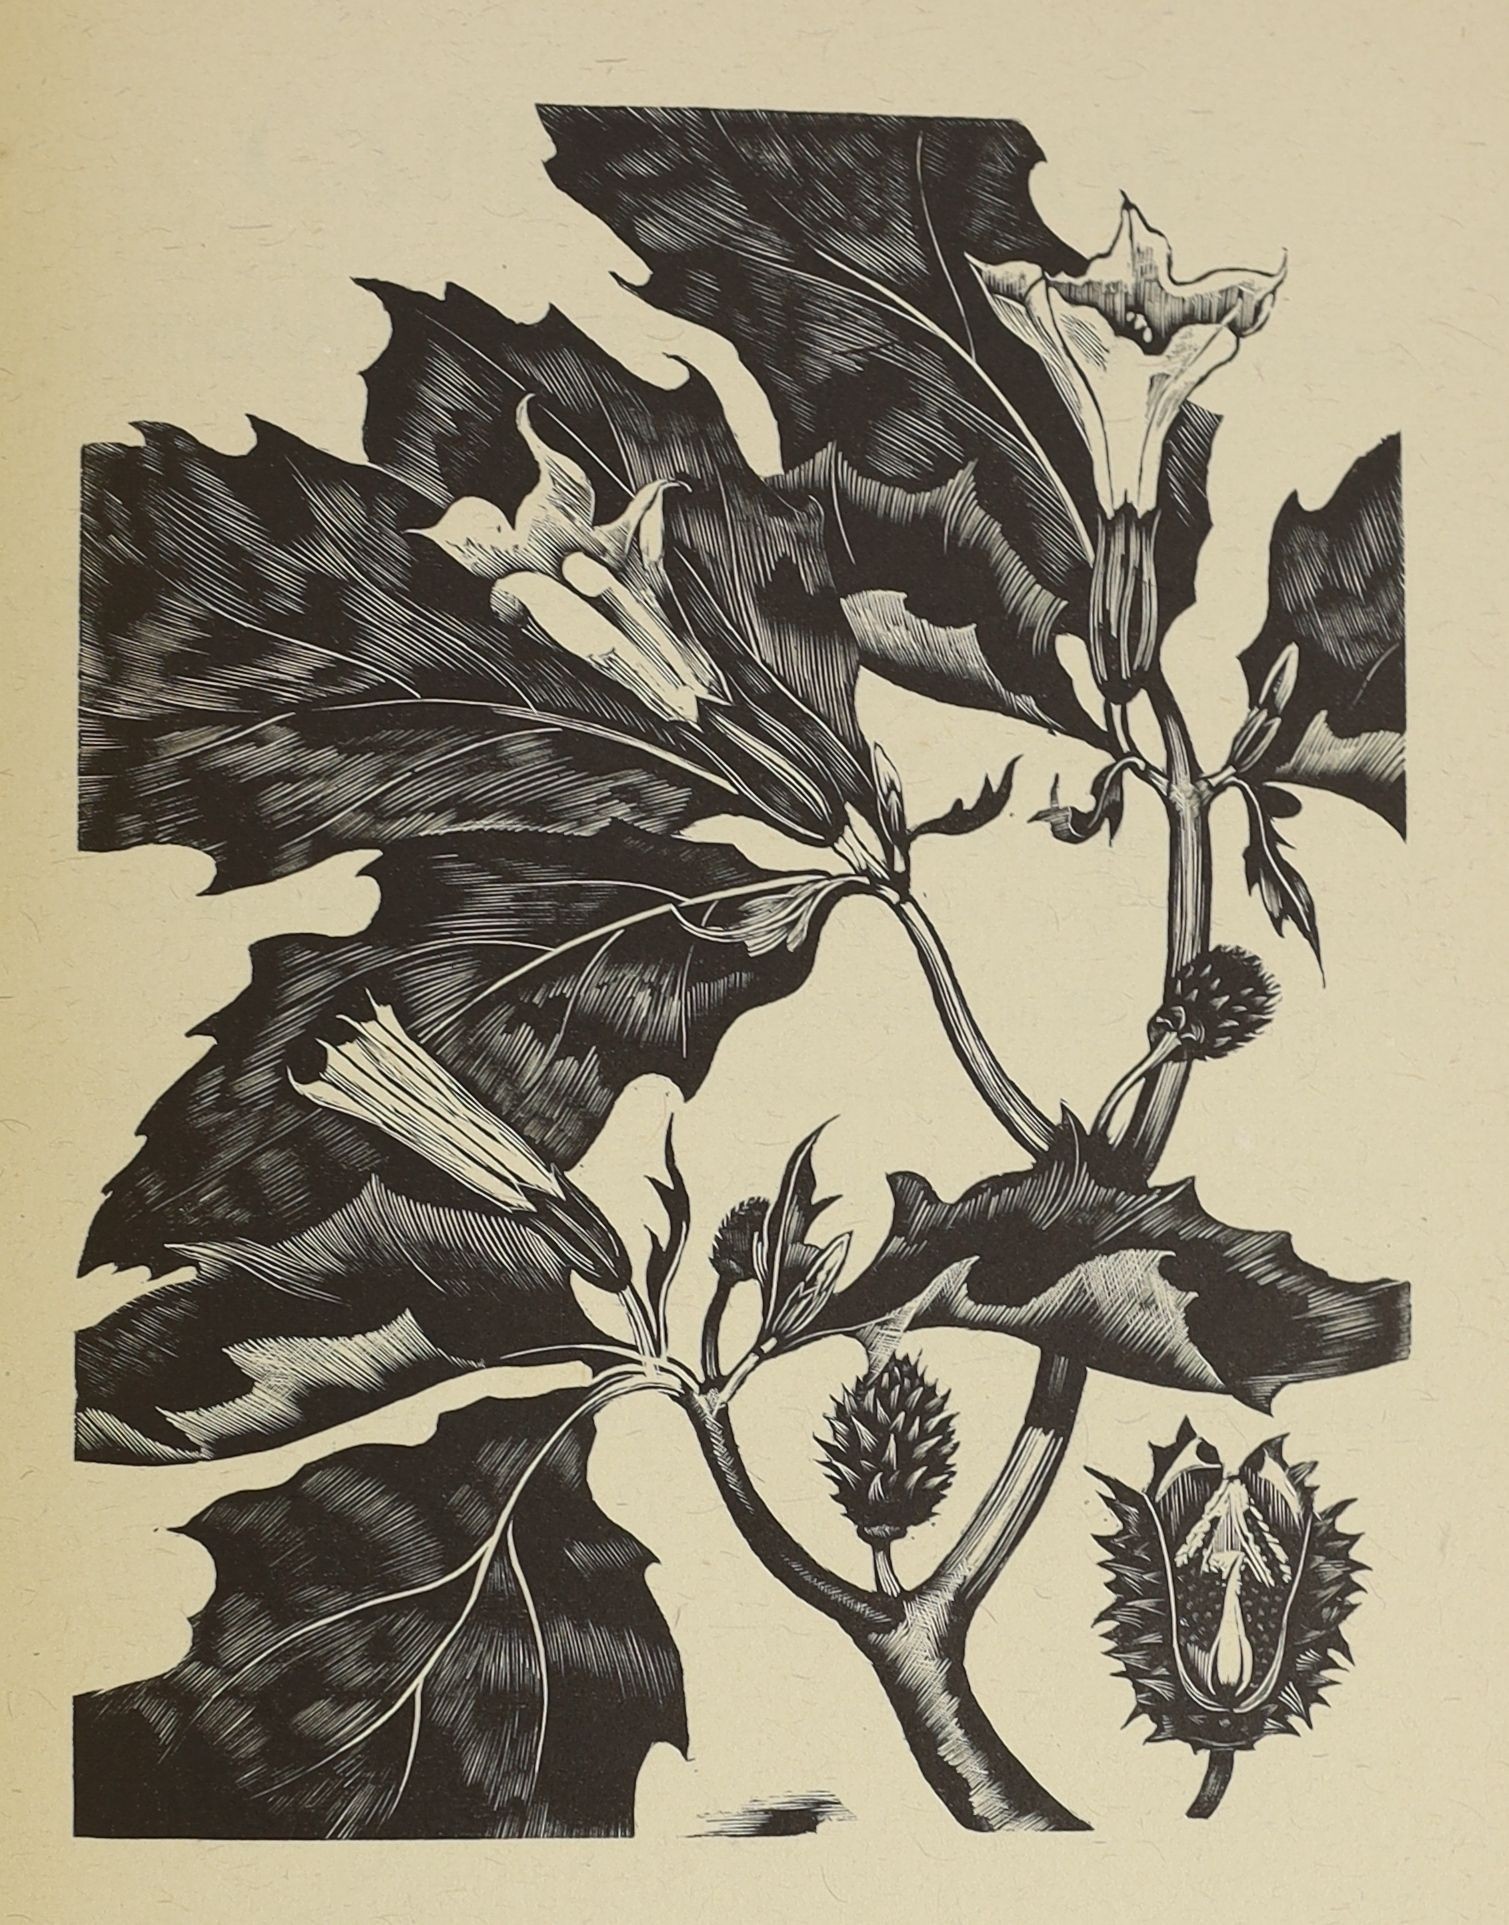 Dallimore, W. And Nash, John- Haslewood Books. Poisonous Plants Deadly, Dangerous and Suspect. Limited edition, one of 350. Complete with 20 woodcut engraved plates by John Nash. Original cloth with gilt pictorial to upp